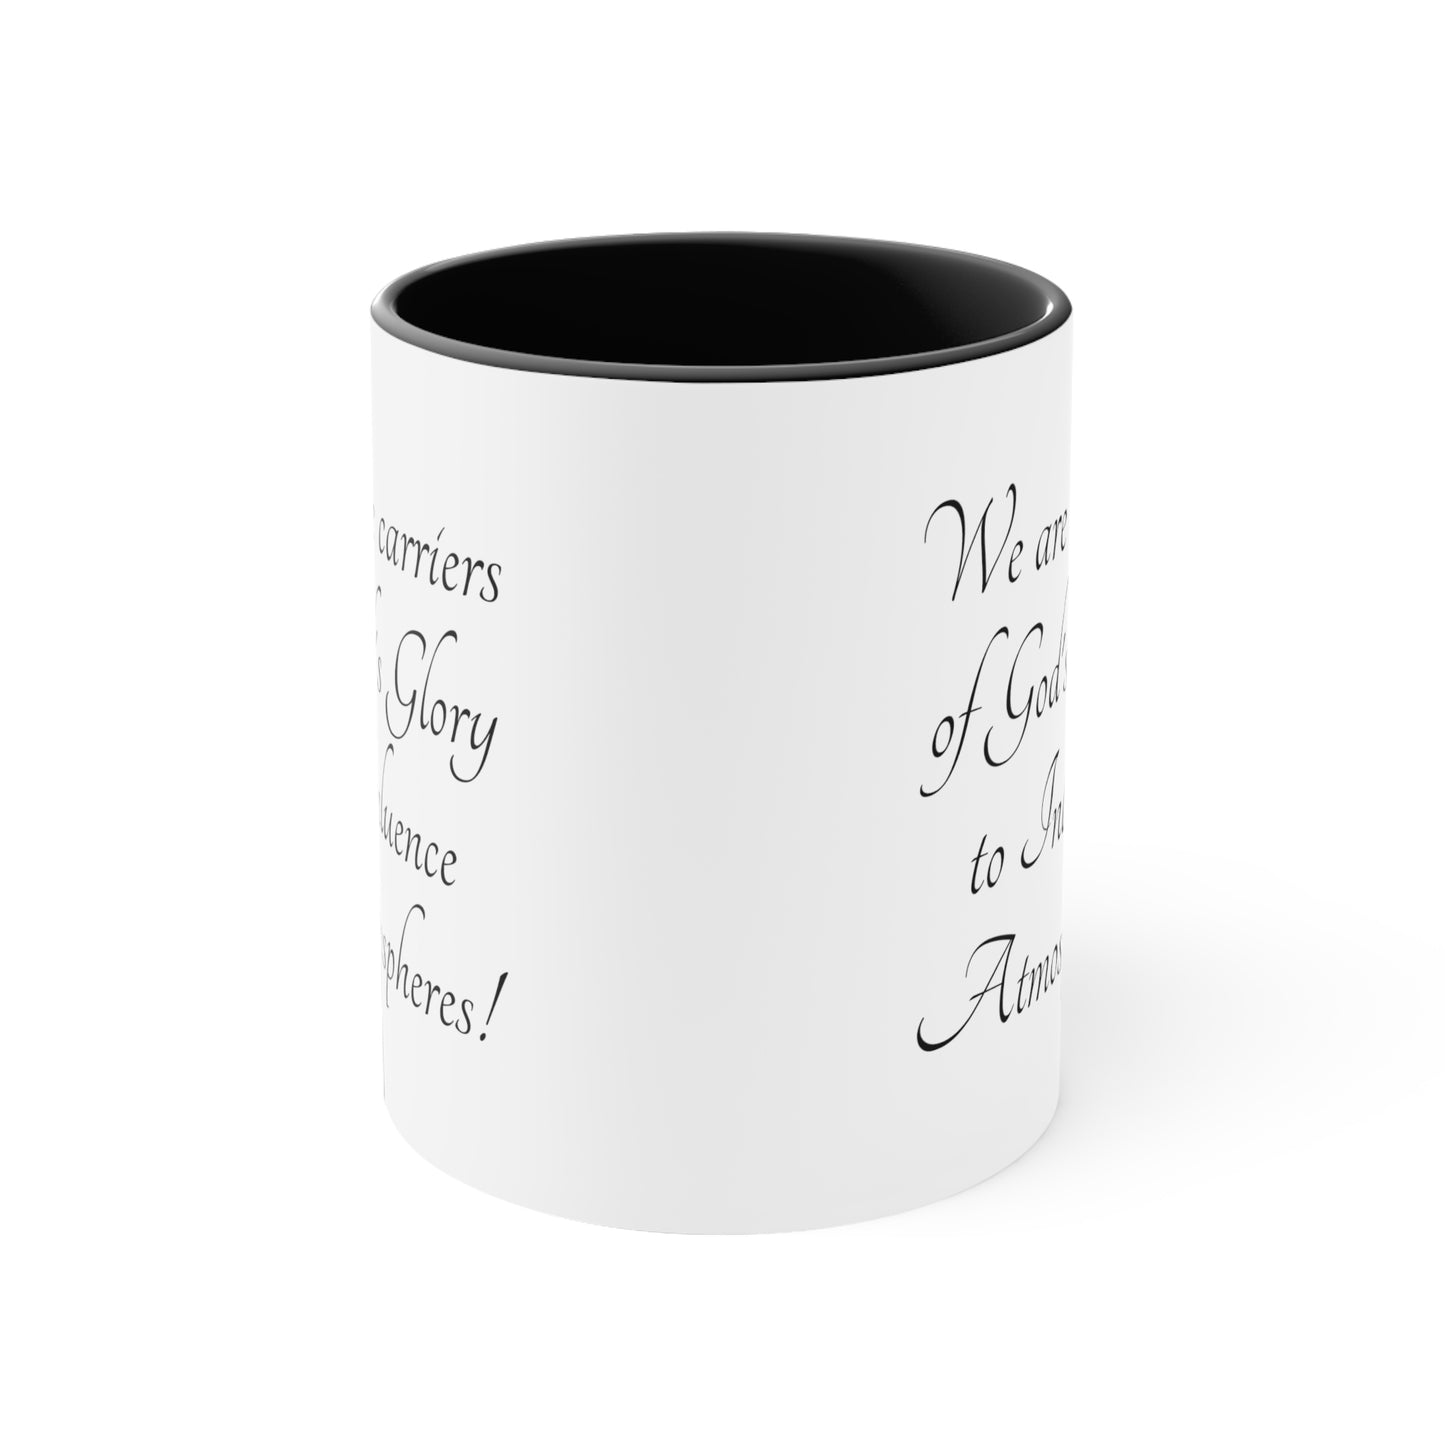 Carriers of Glory Color Accent Coffee Mug, 11oz